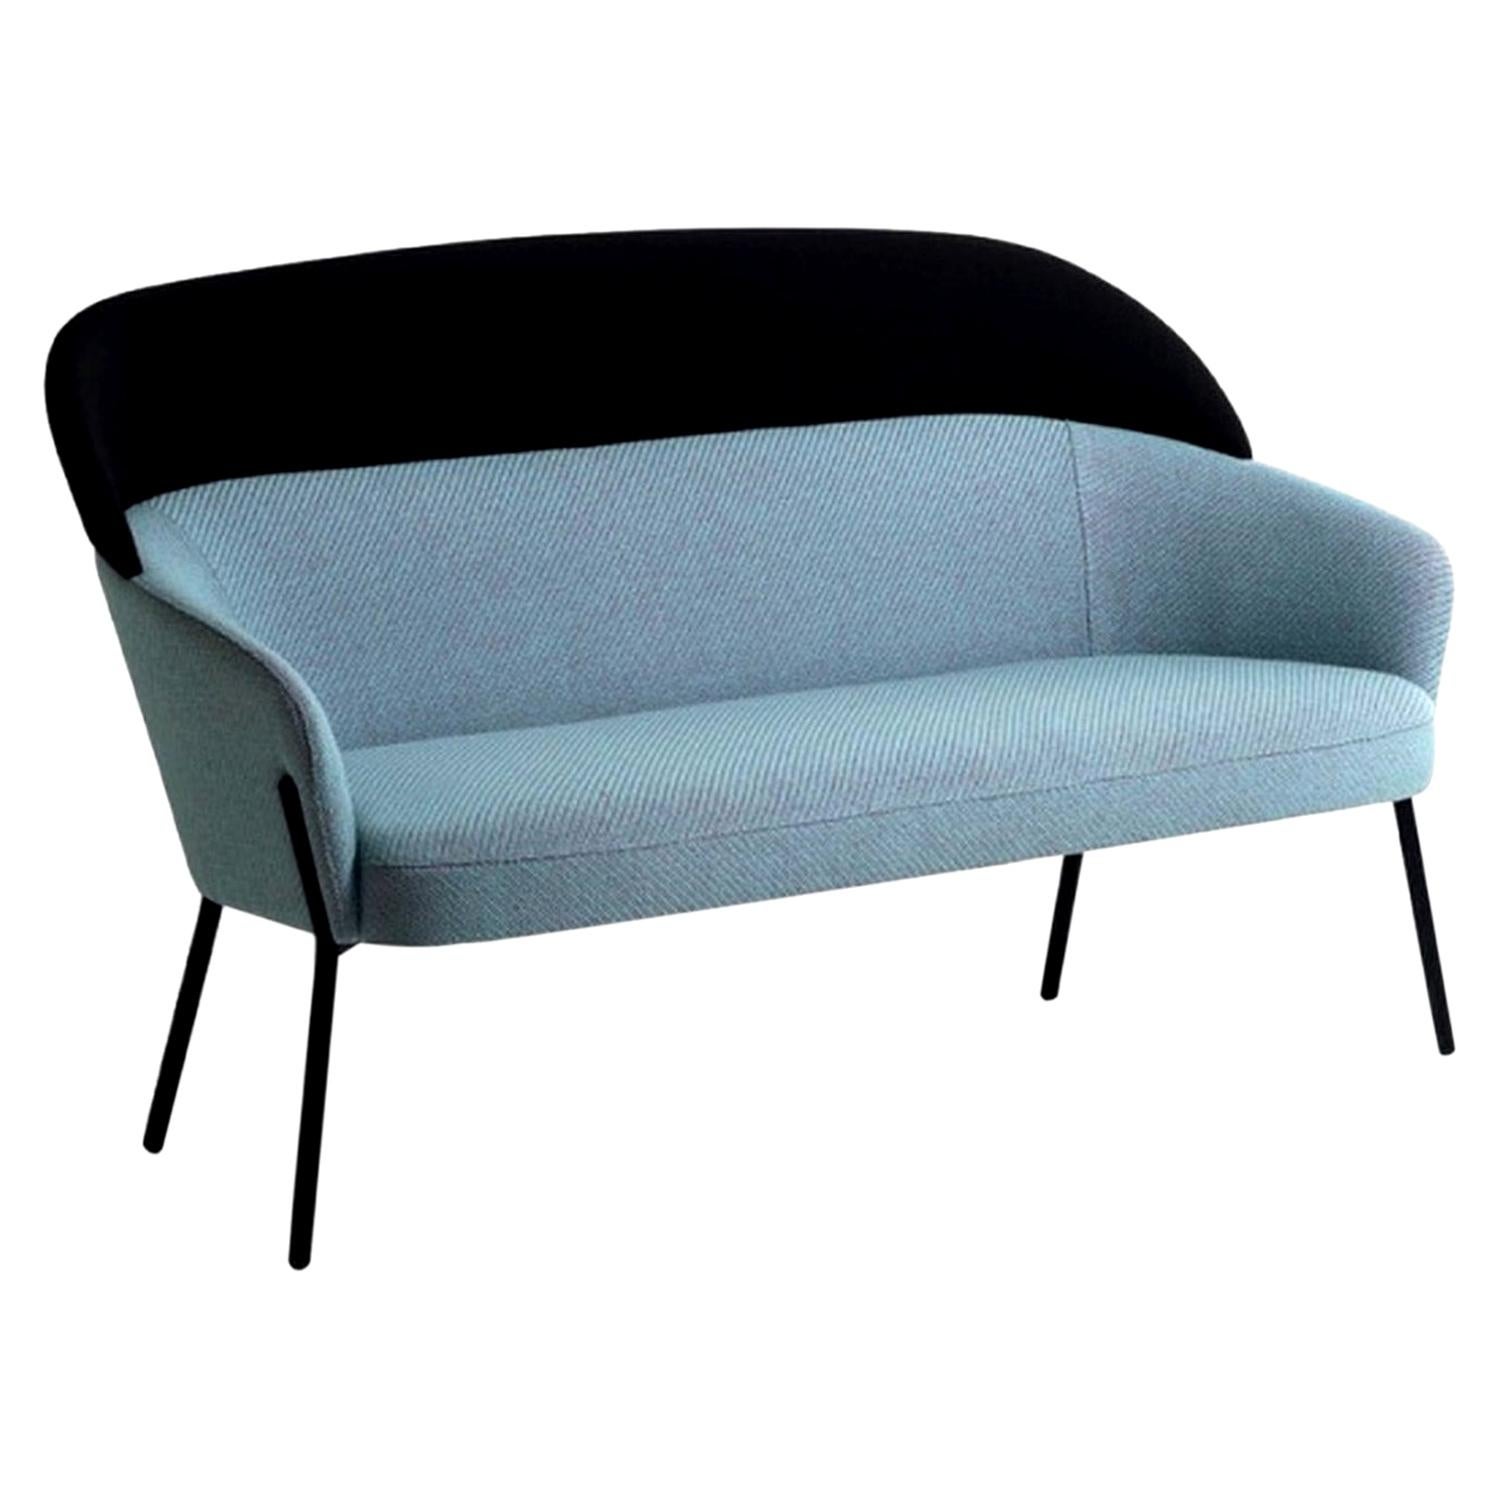 Wam Blue Sofa, Designed by Marco Zito, Made in Italy For Sale